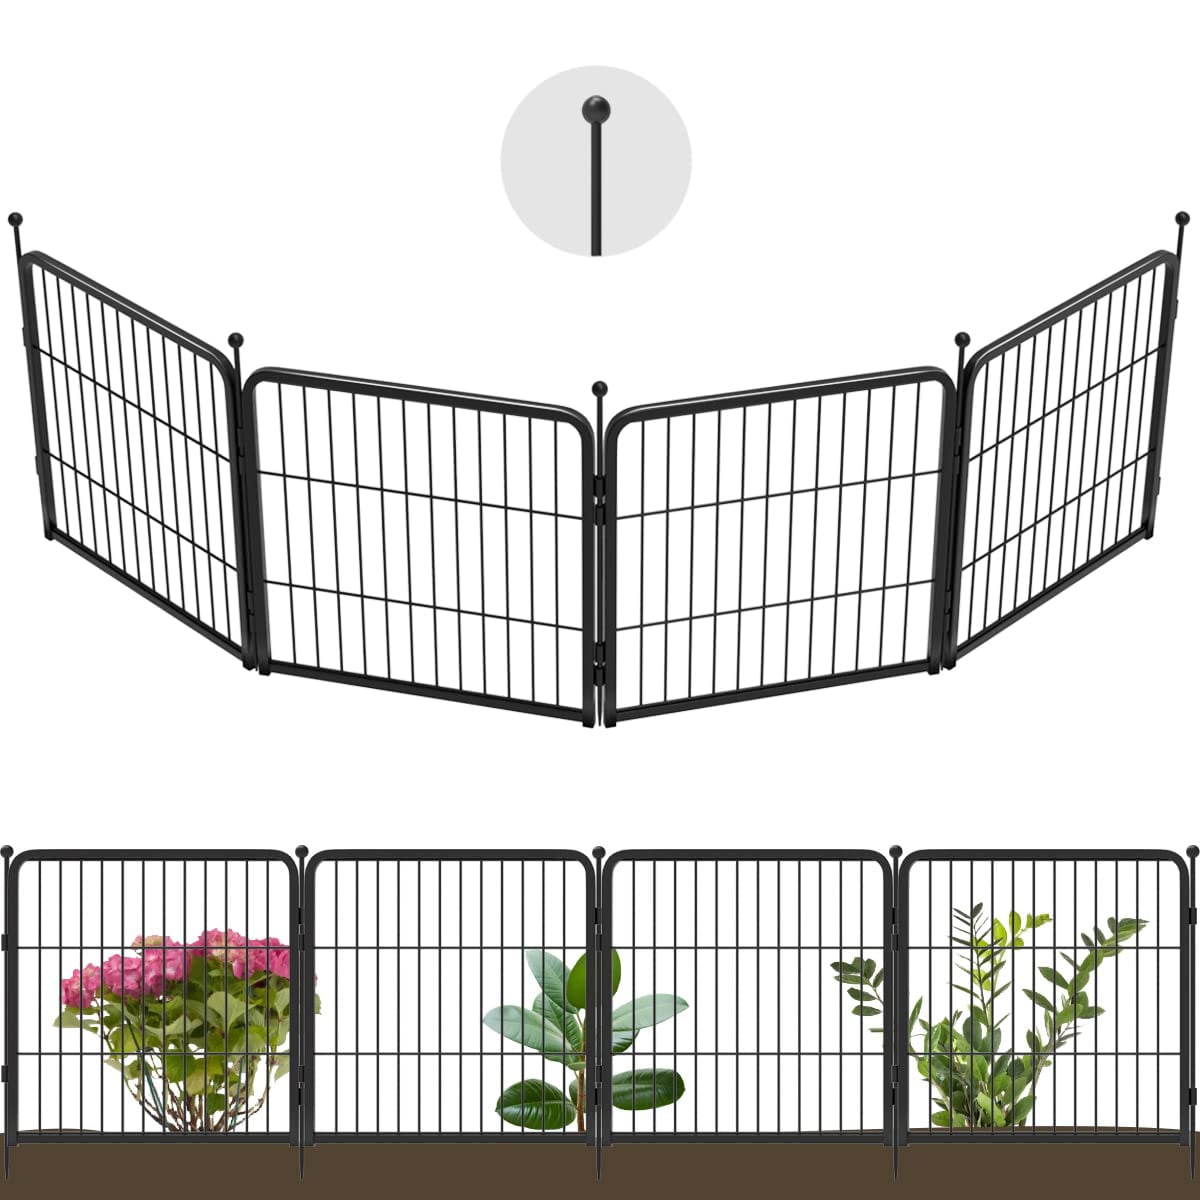 FXW Garden Fence 4 Panels 8ft (L)×24in (H) Animal Barrier Decorative ...